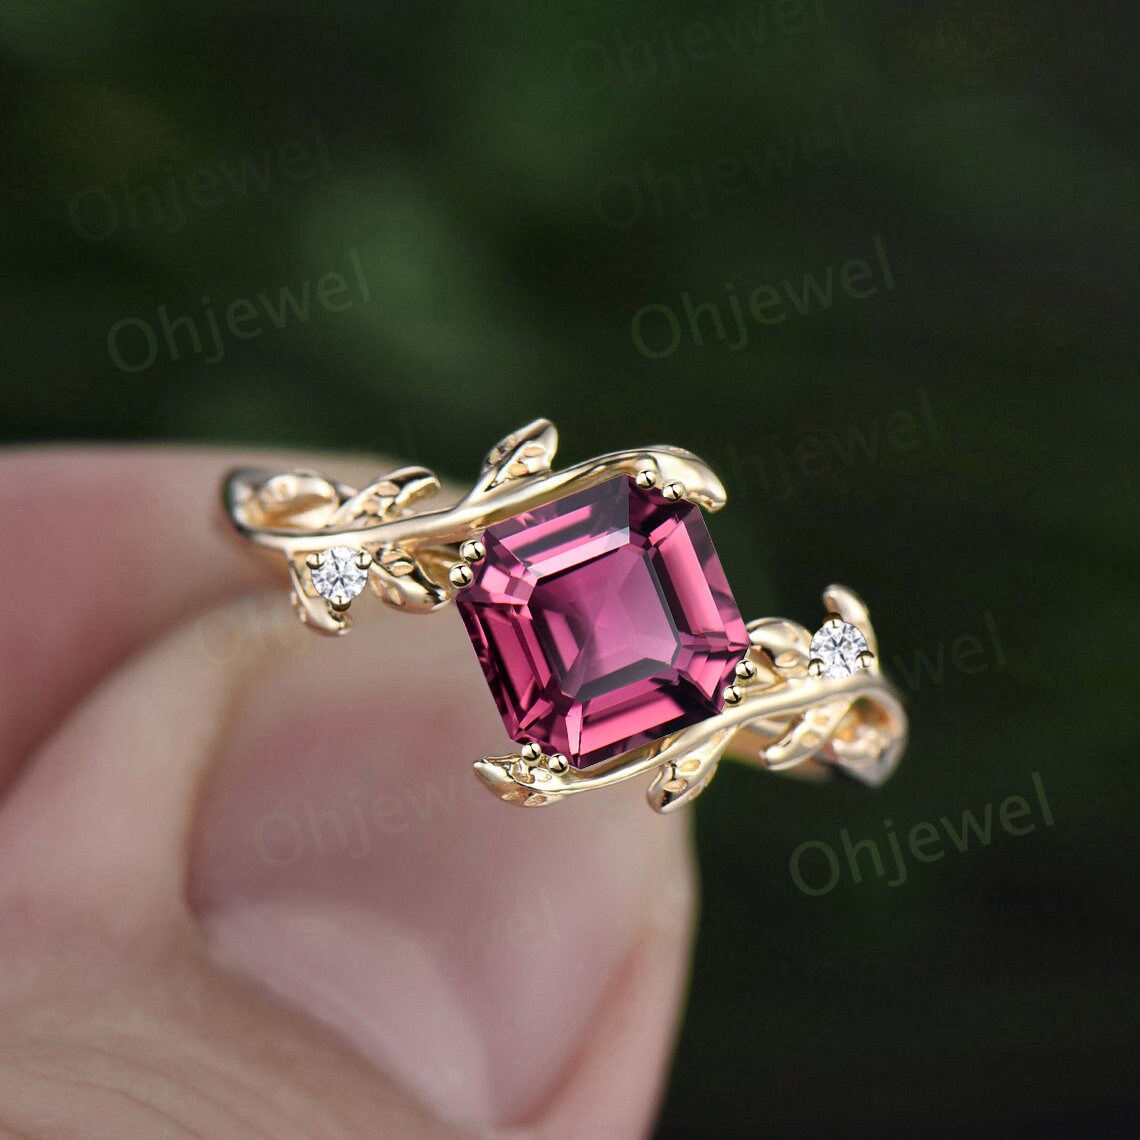 Twig Asscher cut Pink Tourmaline engagement ring 14k rose gold leaf branch three stone diamond ring unique promise wedding ring women gift